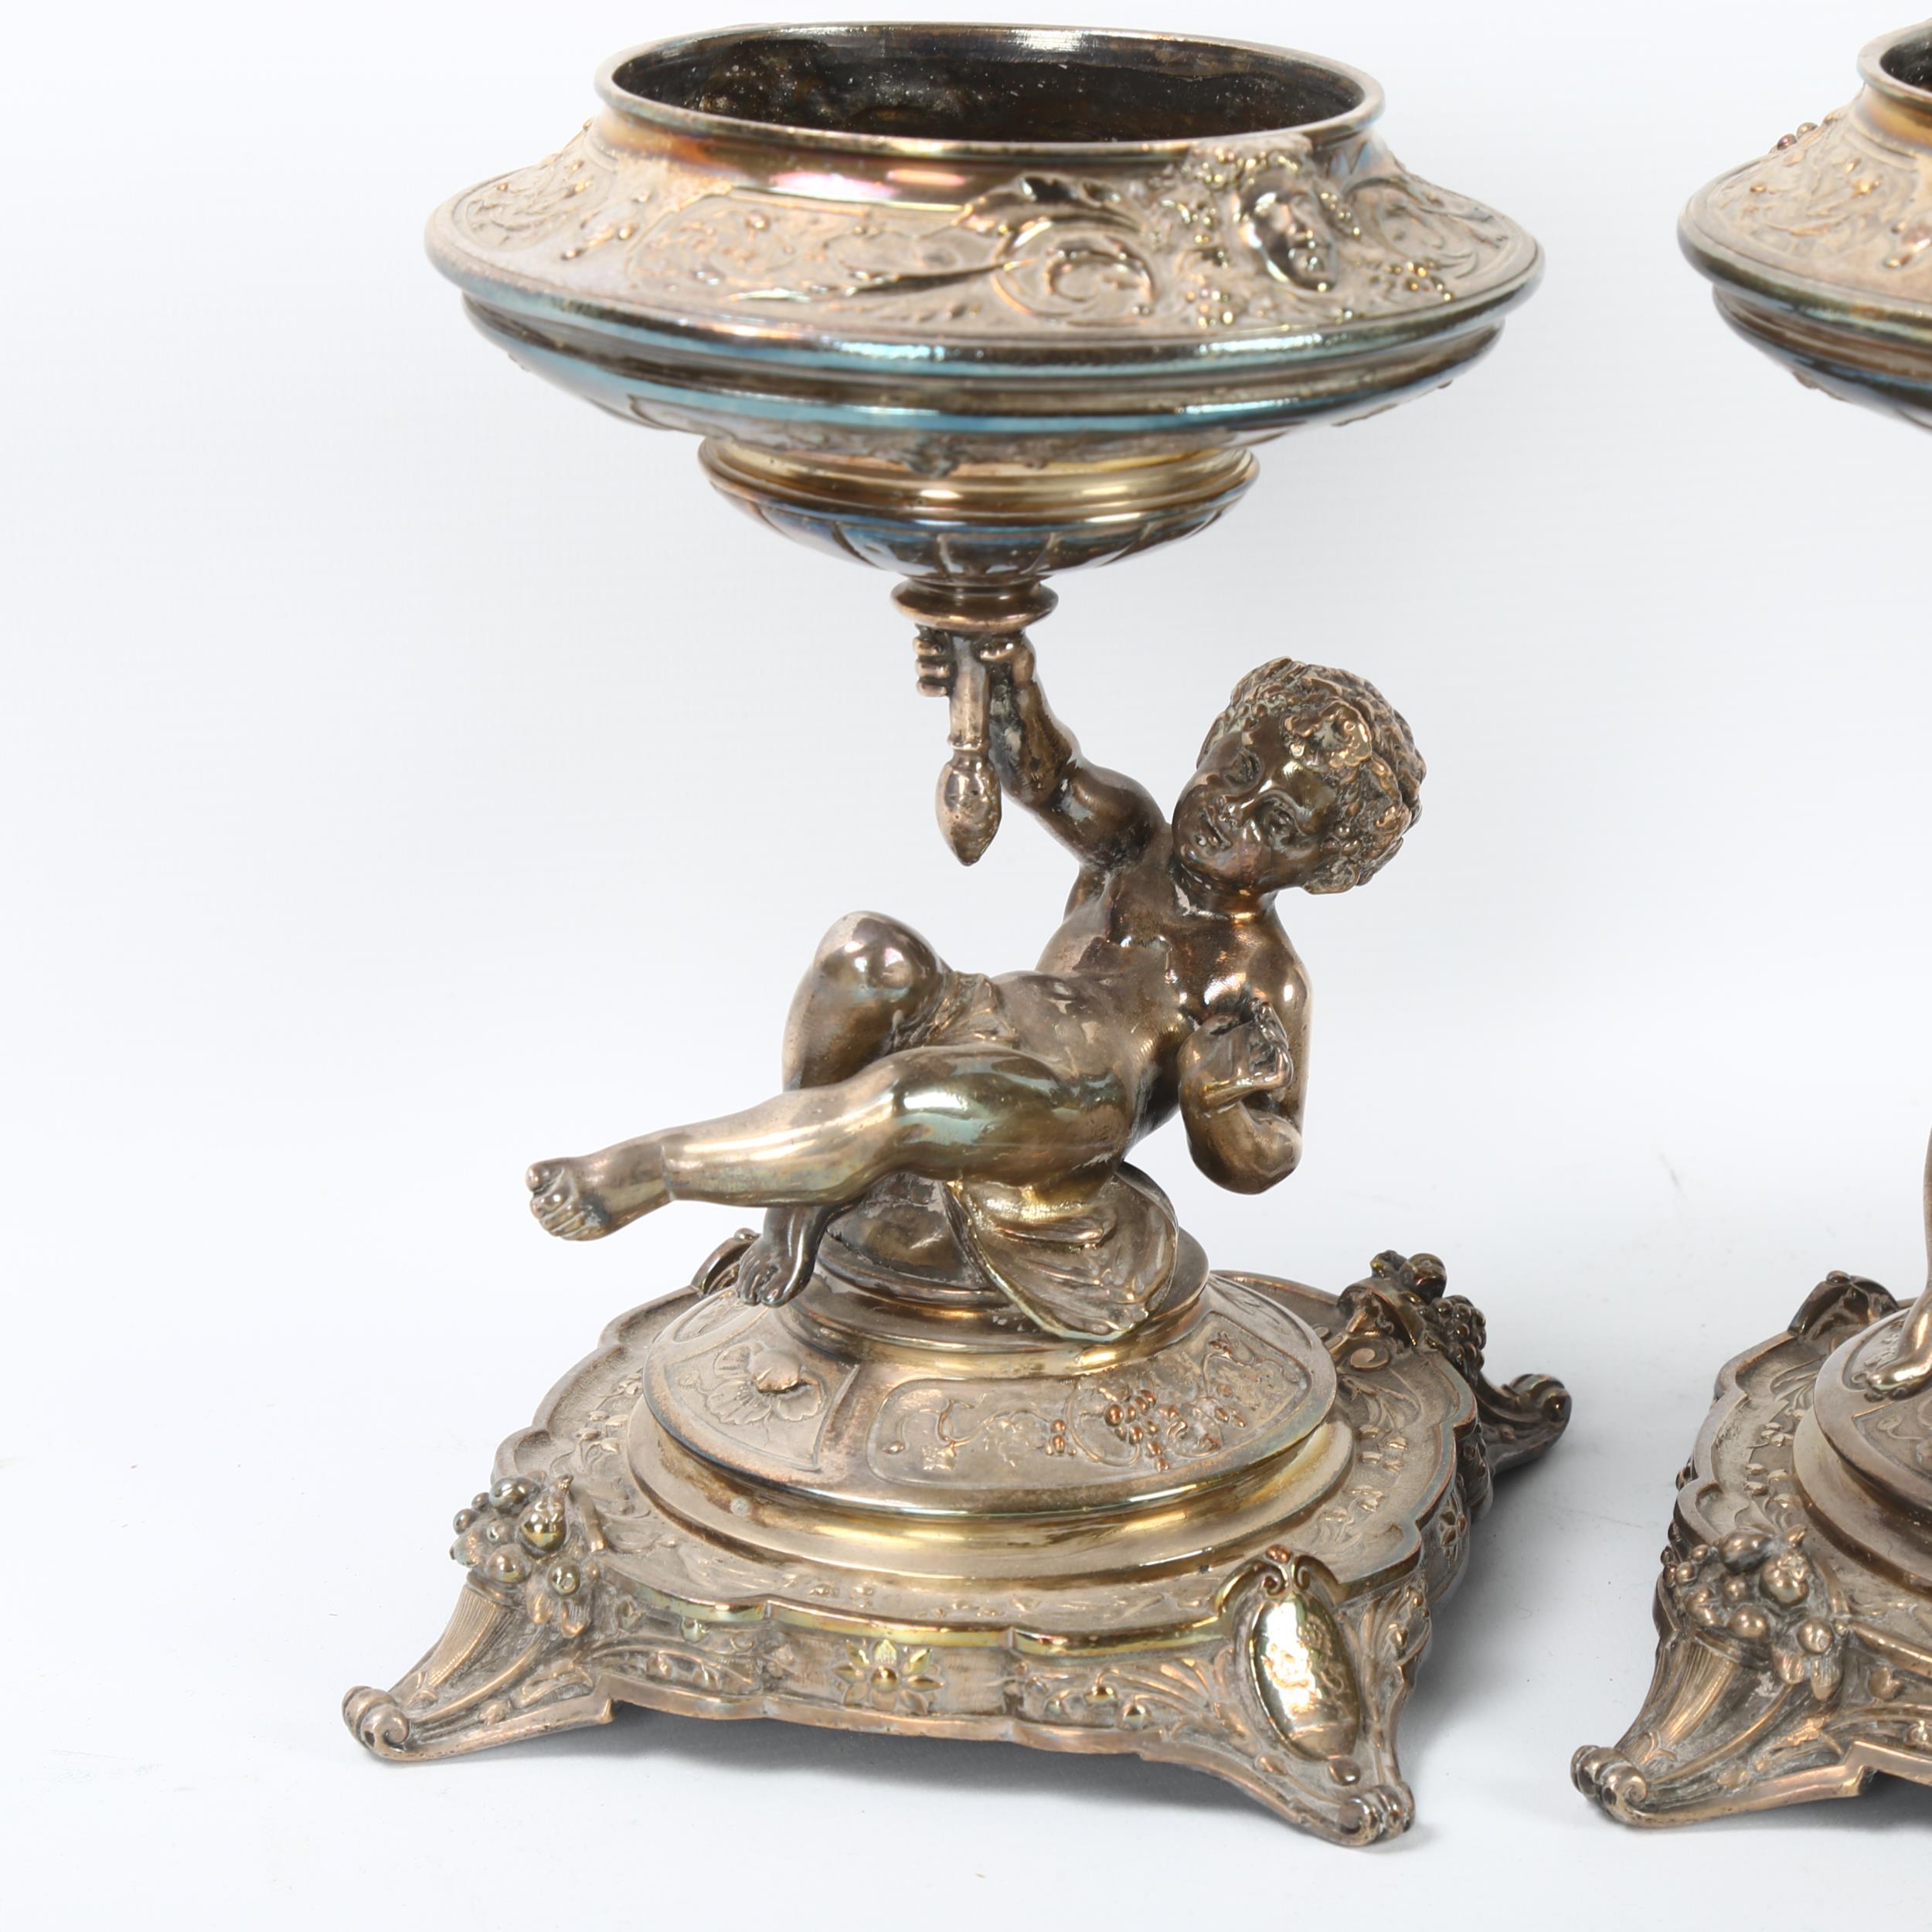 ELKINGTON & CO - a pair of 19th century silver plate table centres, circa 1883, Bacchanalian putti - Image 4 of 6